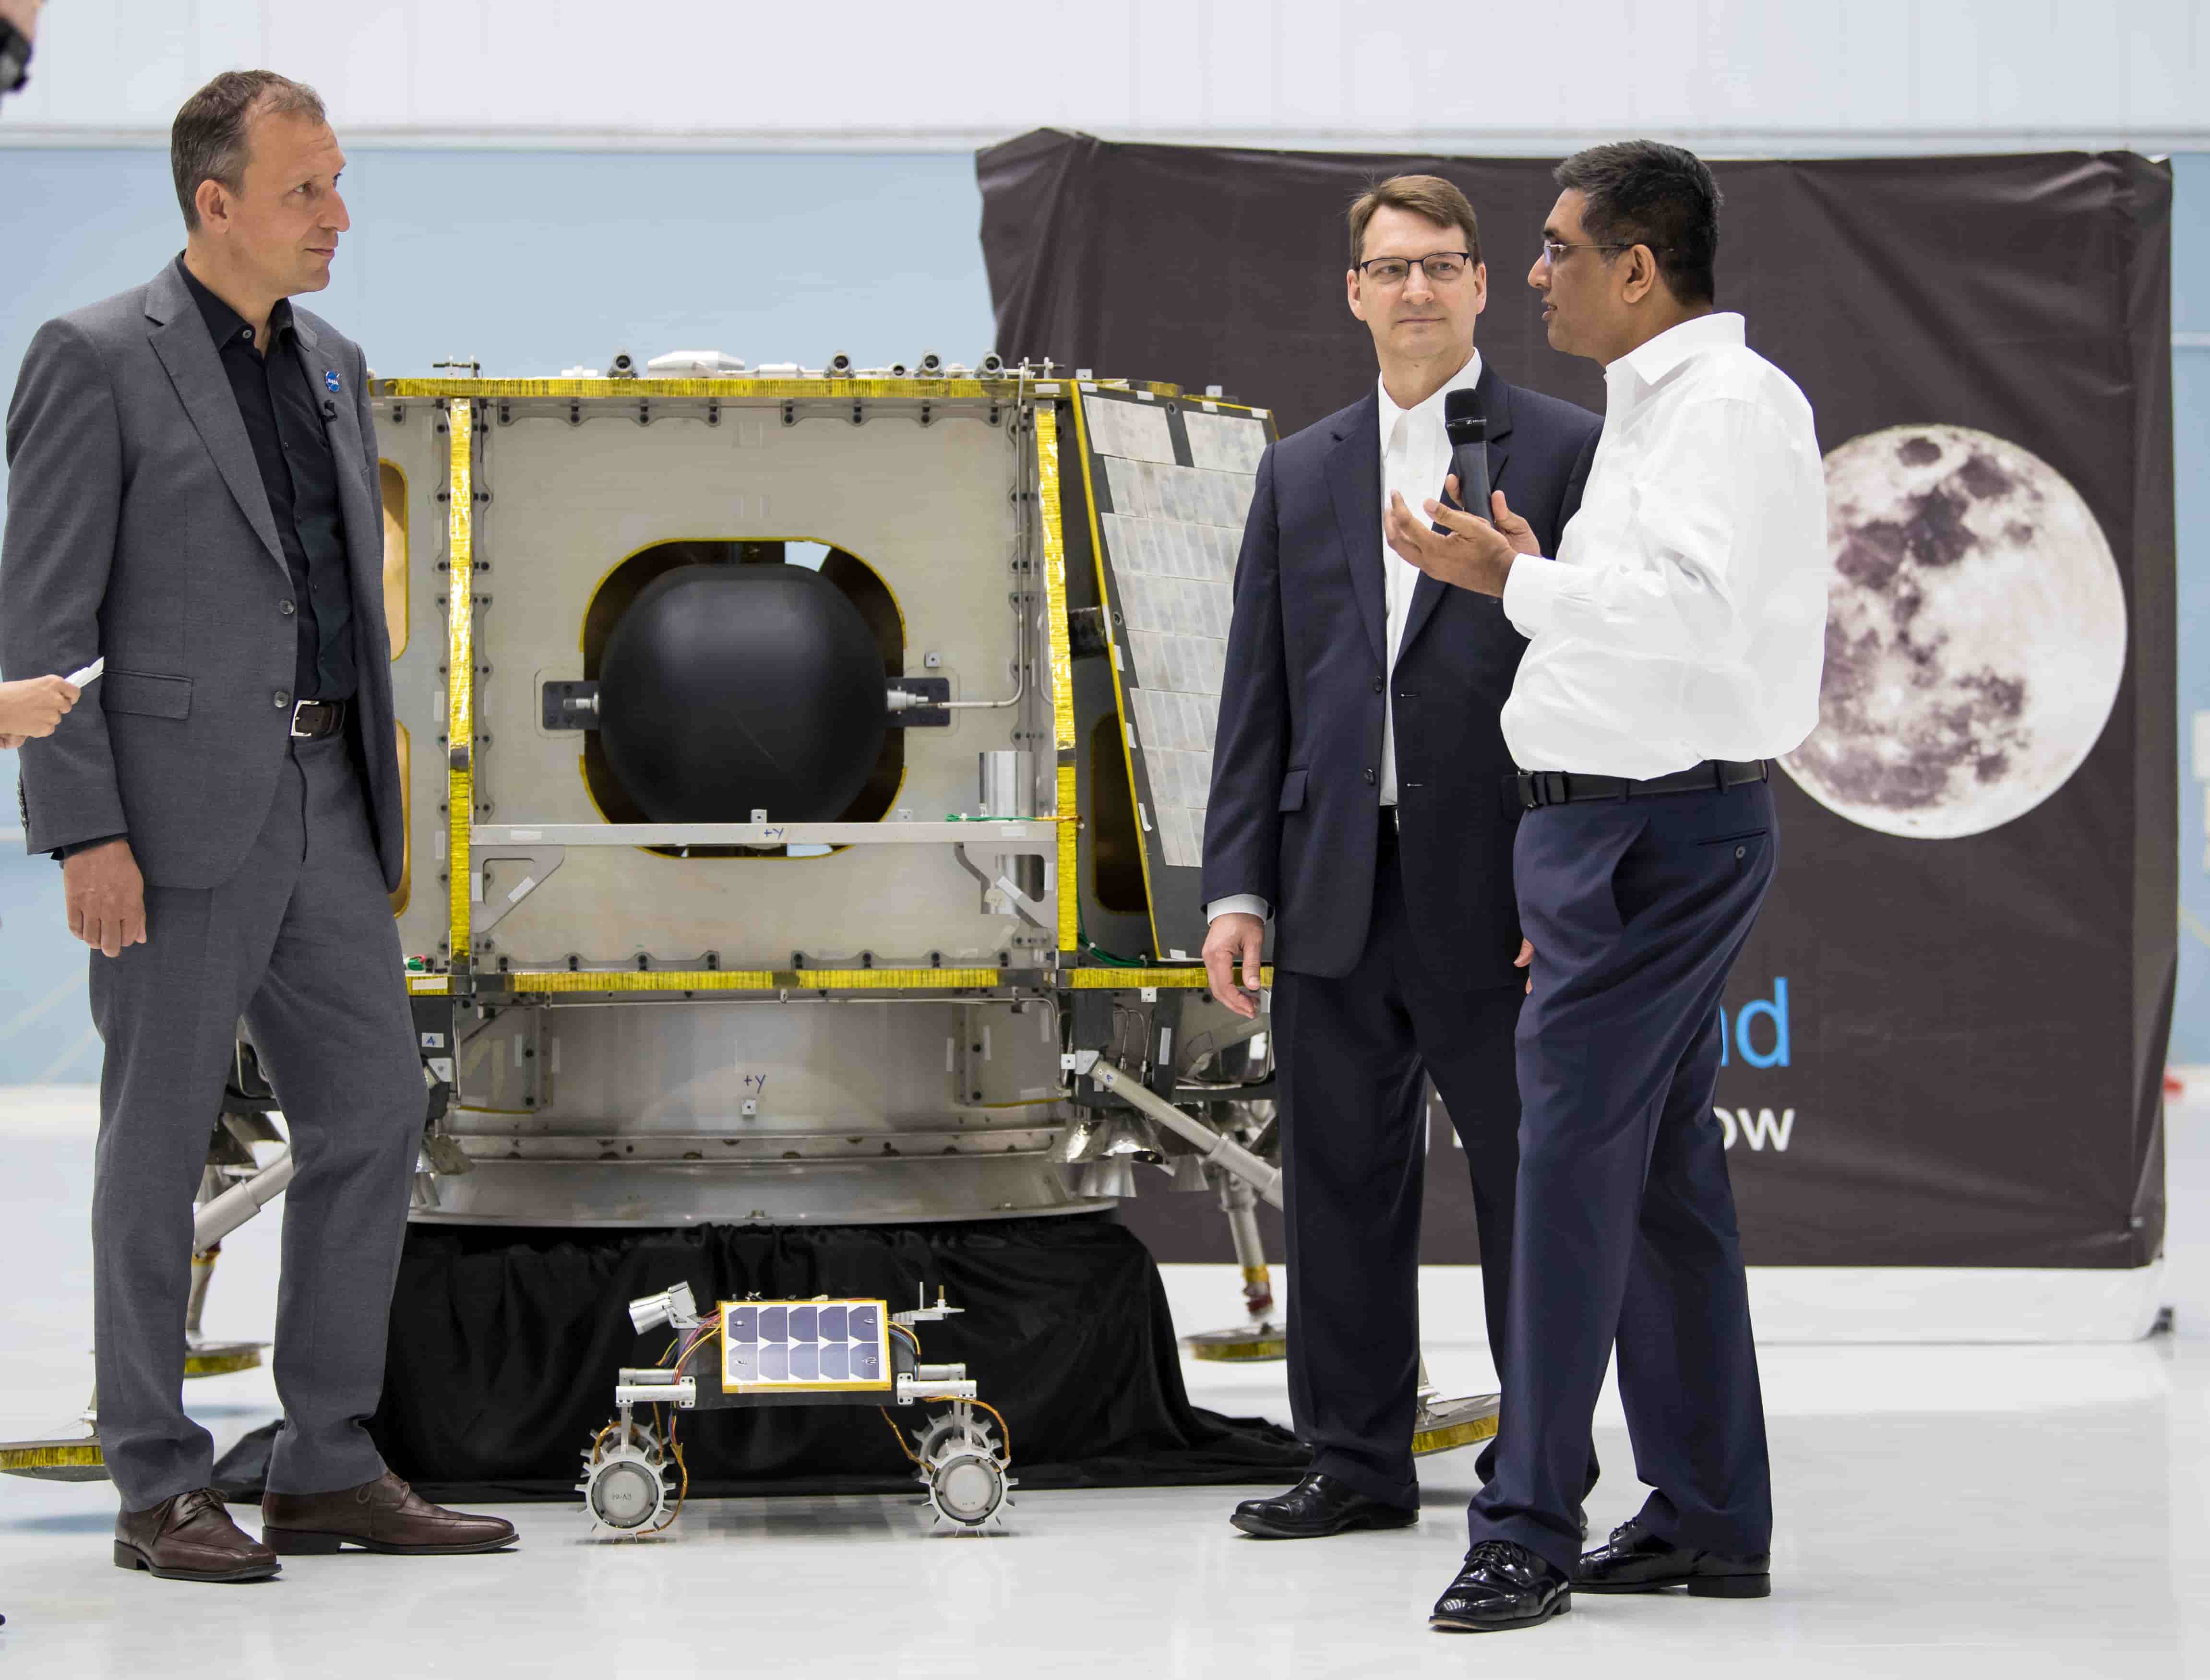 Florida: Private Space Company Launches to the Moon